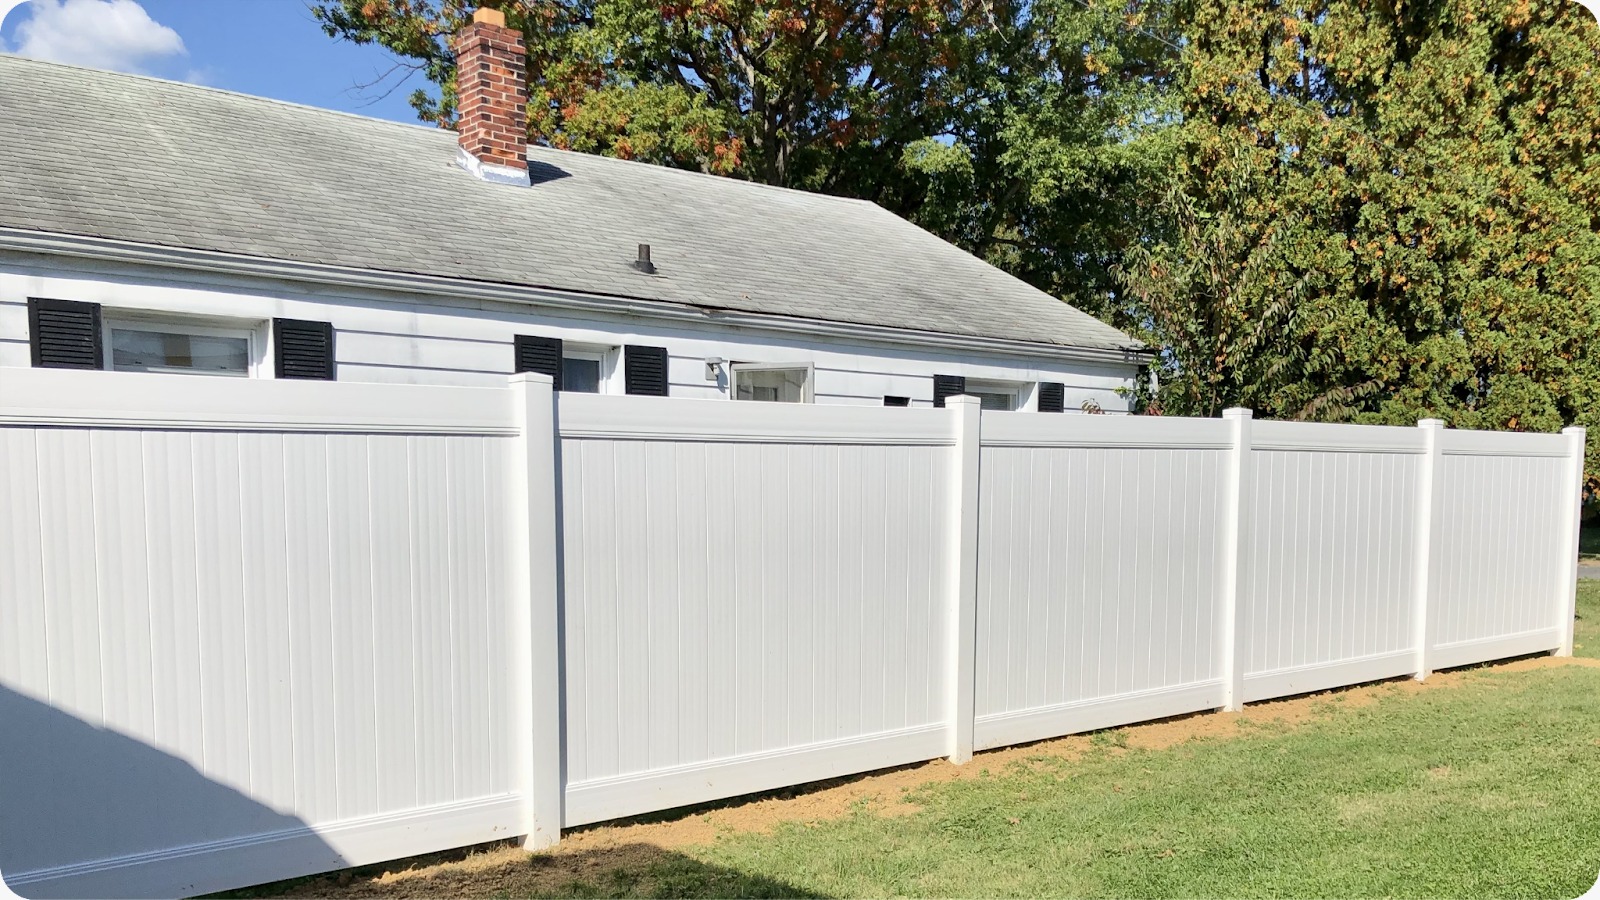 Vinyl Fences Installation in Huntersville, NC | Professional Fencing Contractor In Pineville Nc